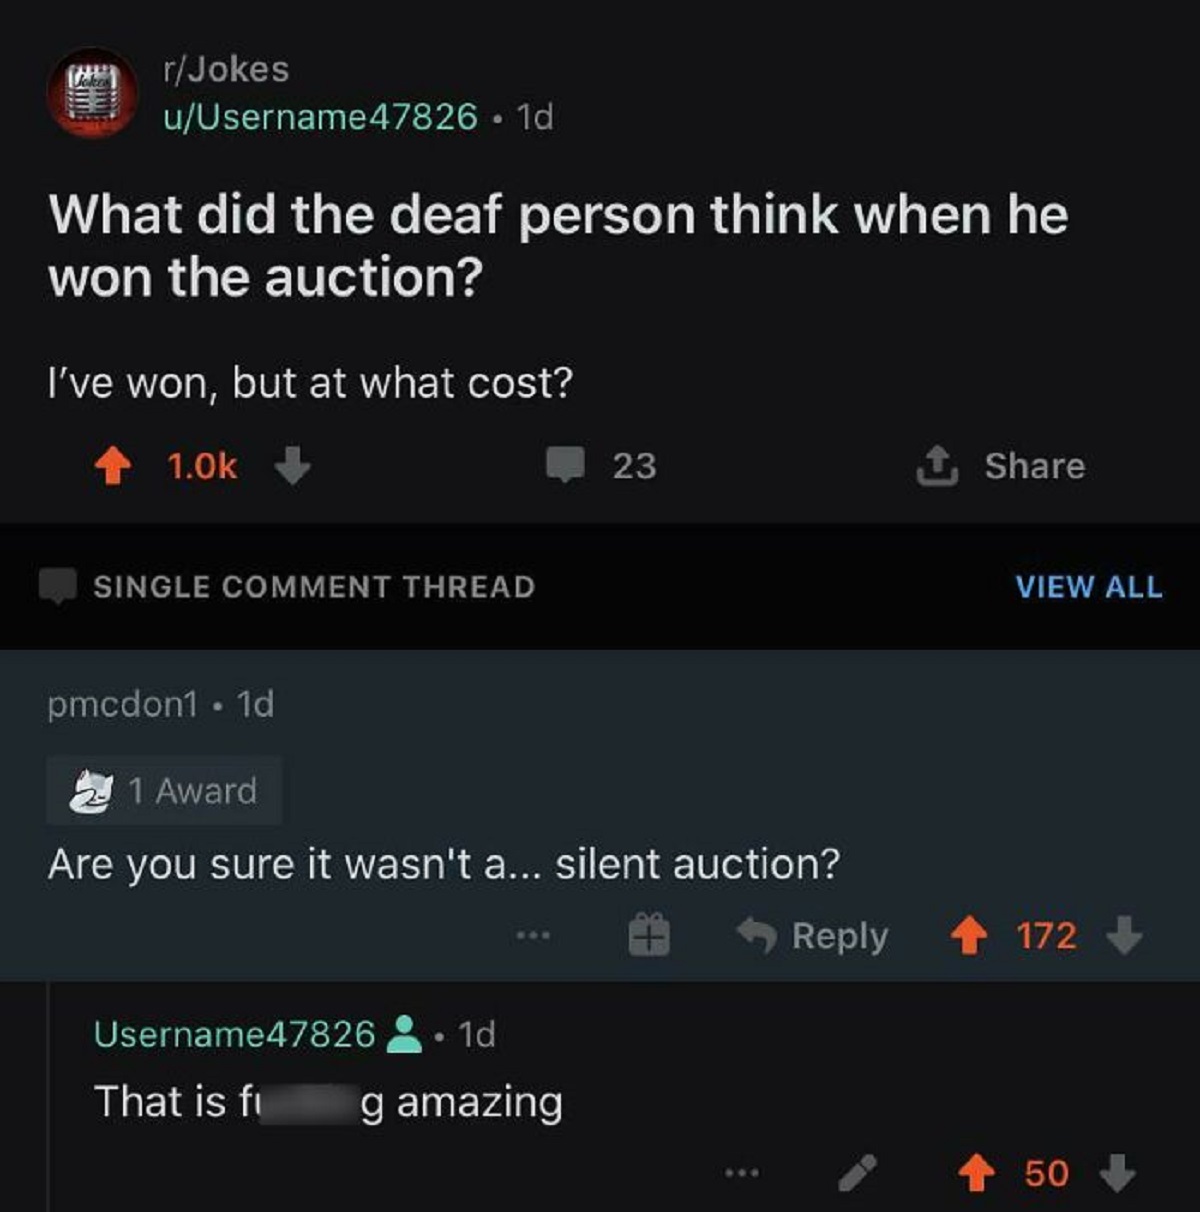 funny replies better than the original - screenshot - rJokes uUsername47826 1d What did the deaf person think when he won the auction? I've won, but at what cost? Single Comment Thread pmcdon1 1d 1 Award Are you sure it wasn't a... silent auction? Usernam